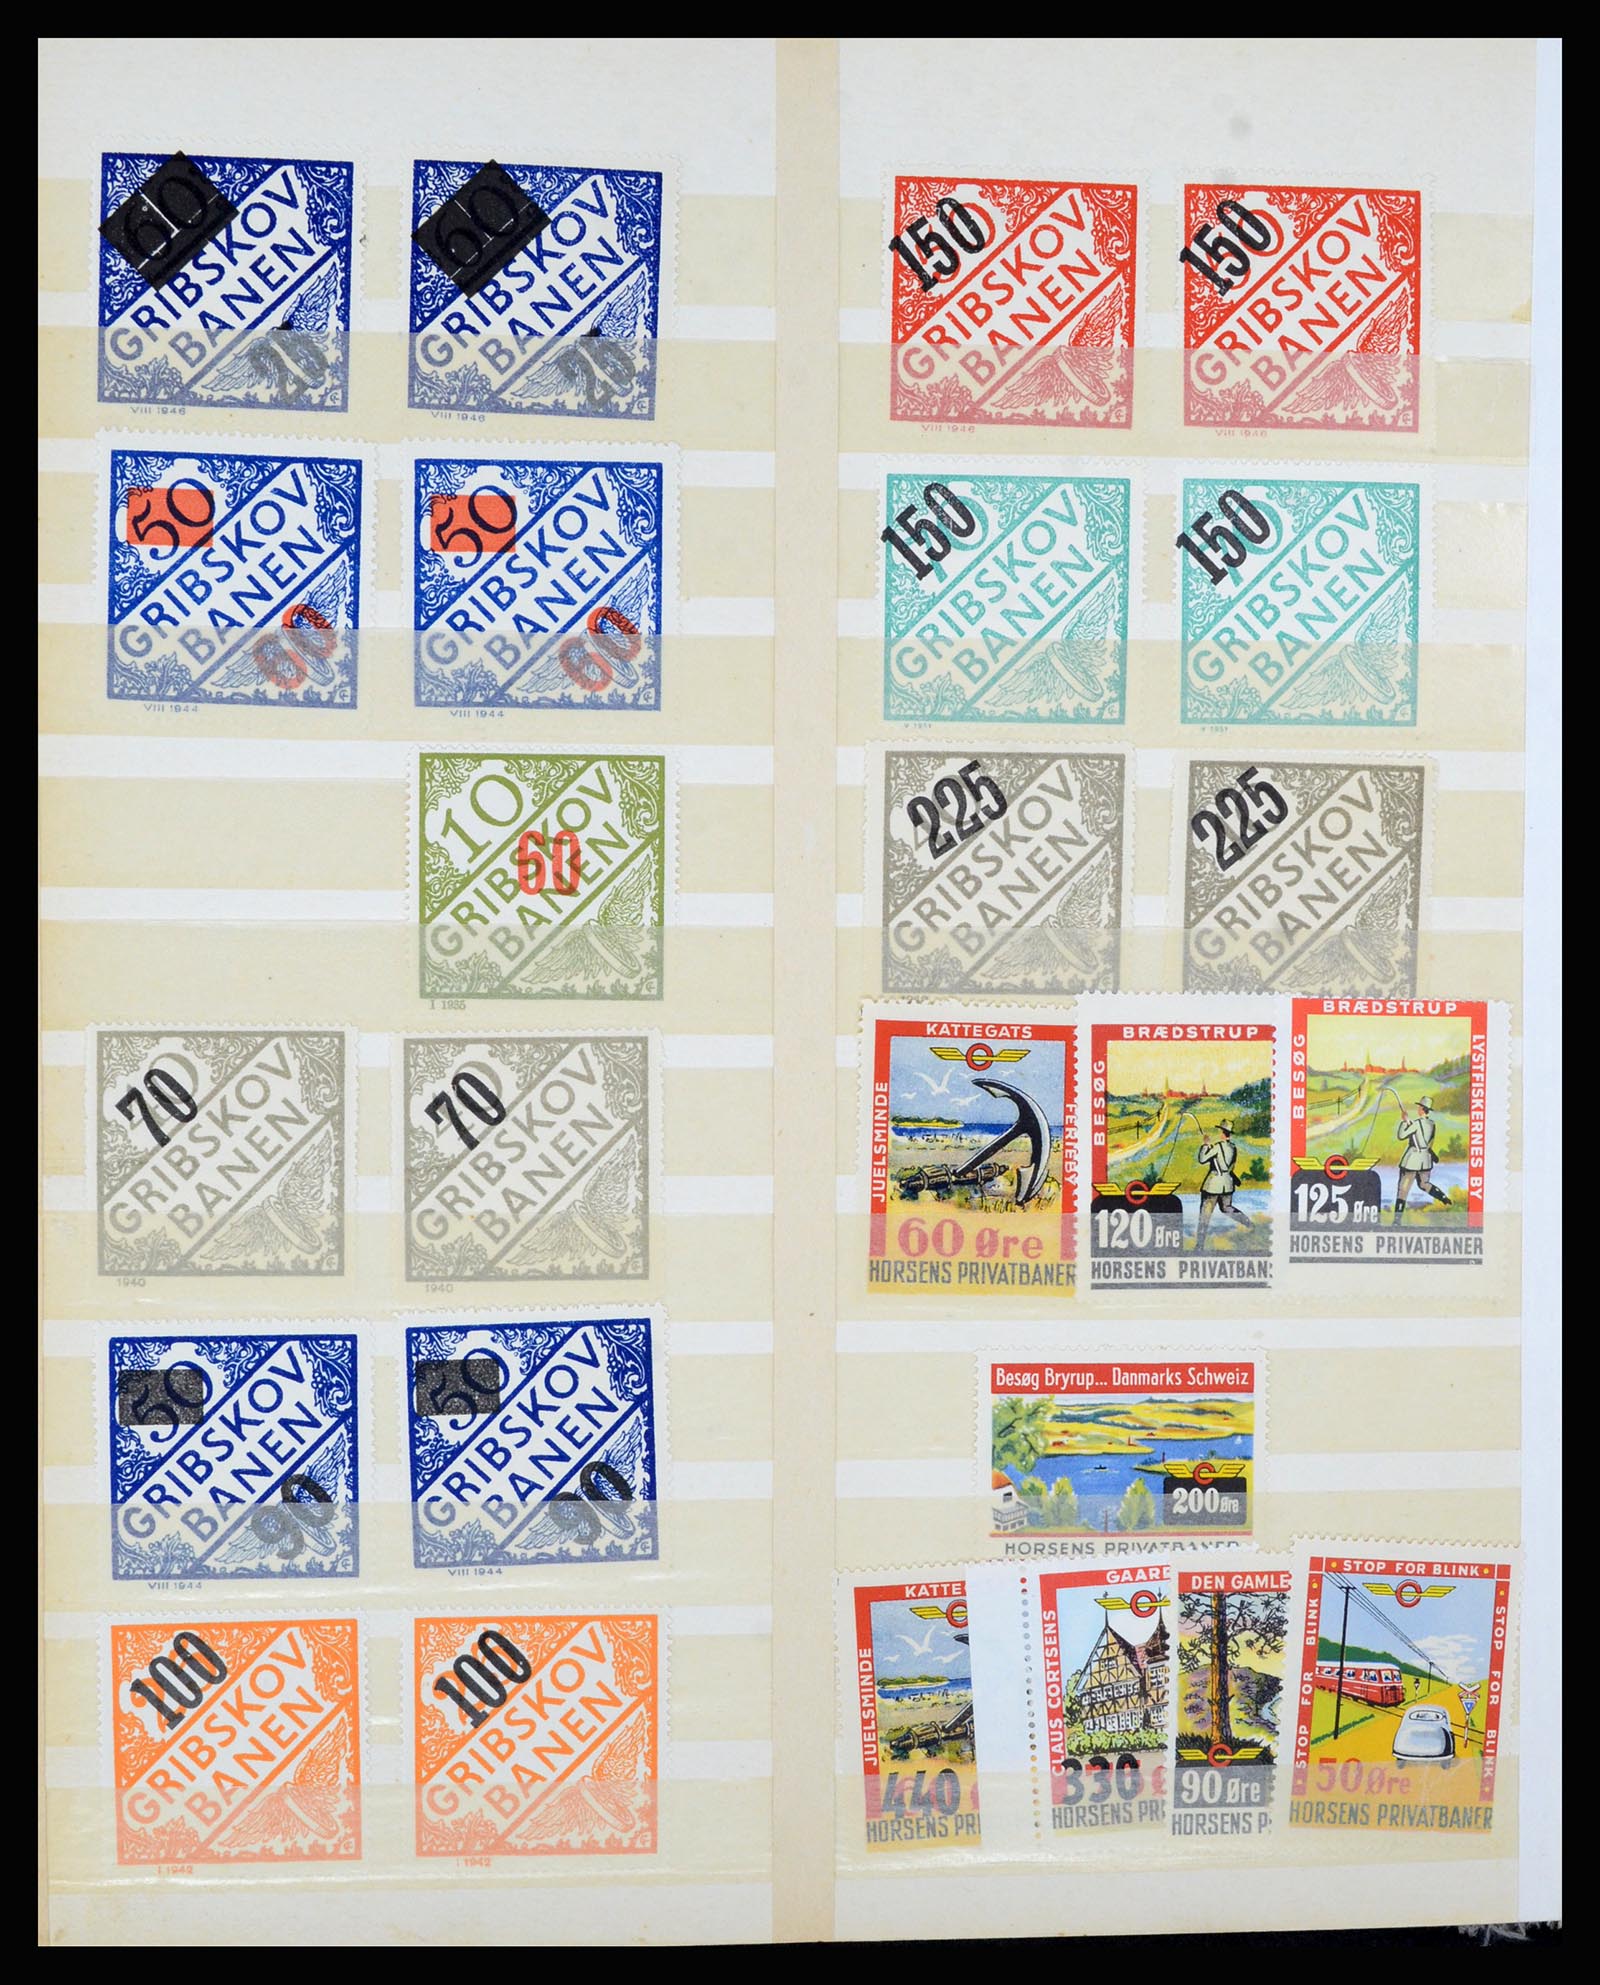 36767 008 - Stamp collection 36767 Denmark railroadstamps.